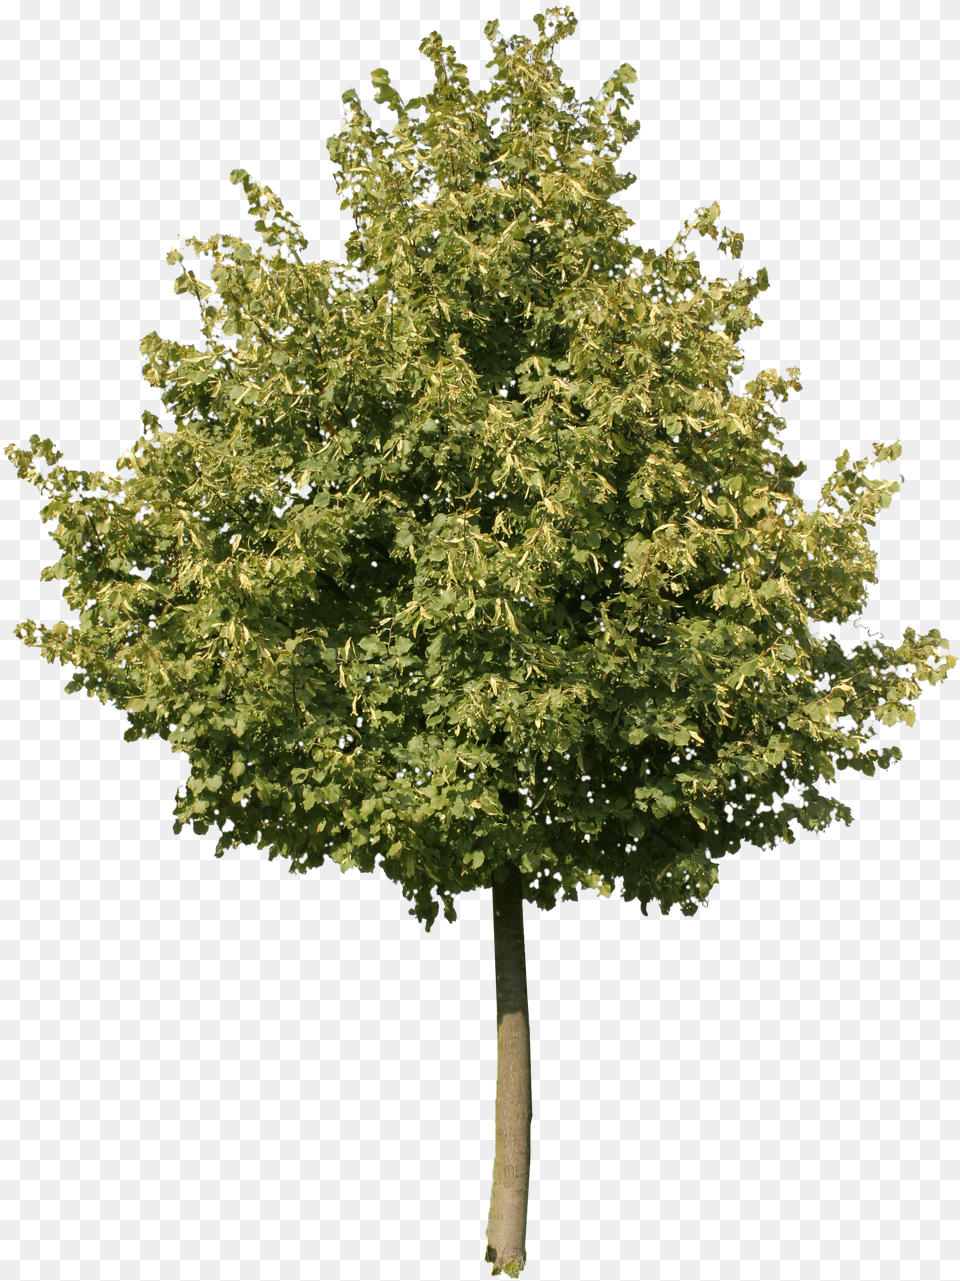 Download Hd Young Oak Tree Transparent Background Olive Tree Png